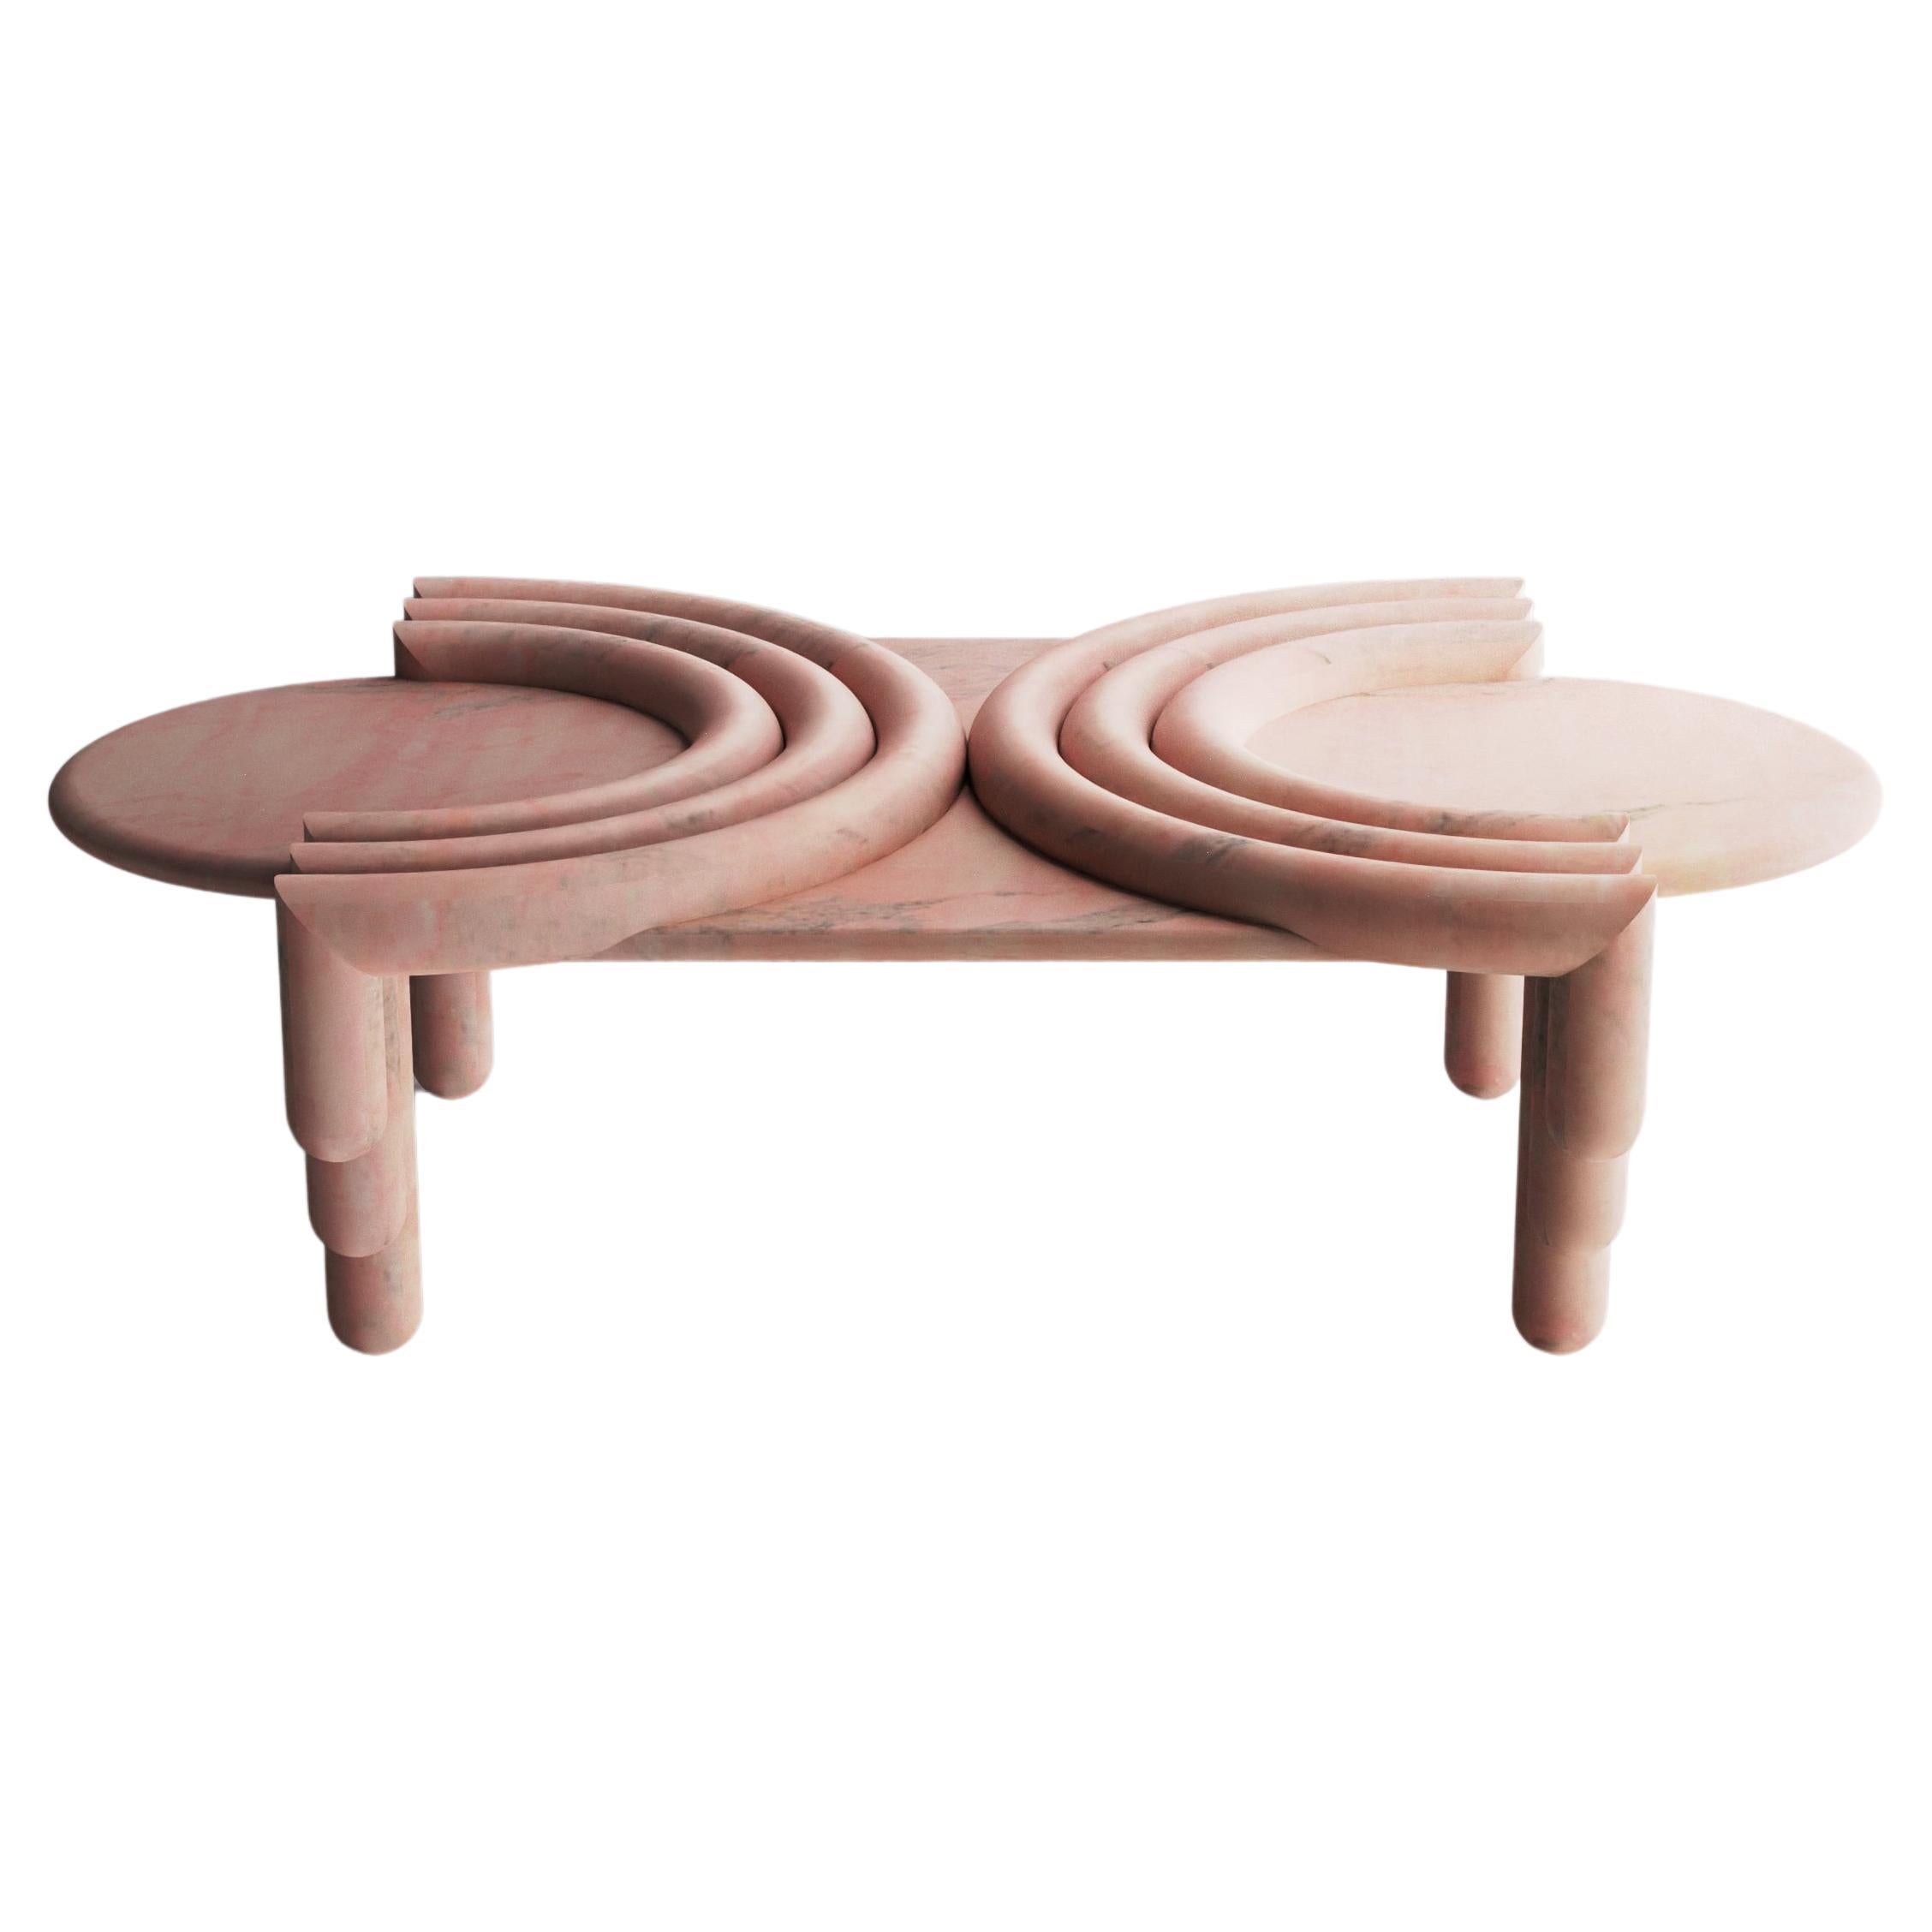 Sculptural Kipferl Coffee Table by Lara Bohinc in Rosa Portugalo Marble